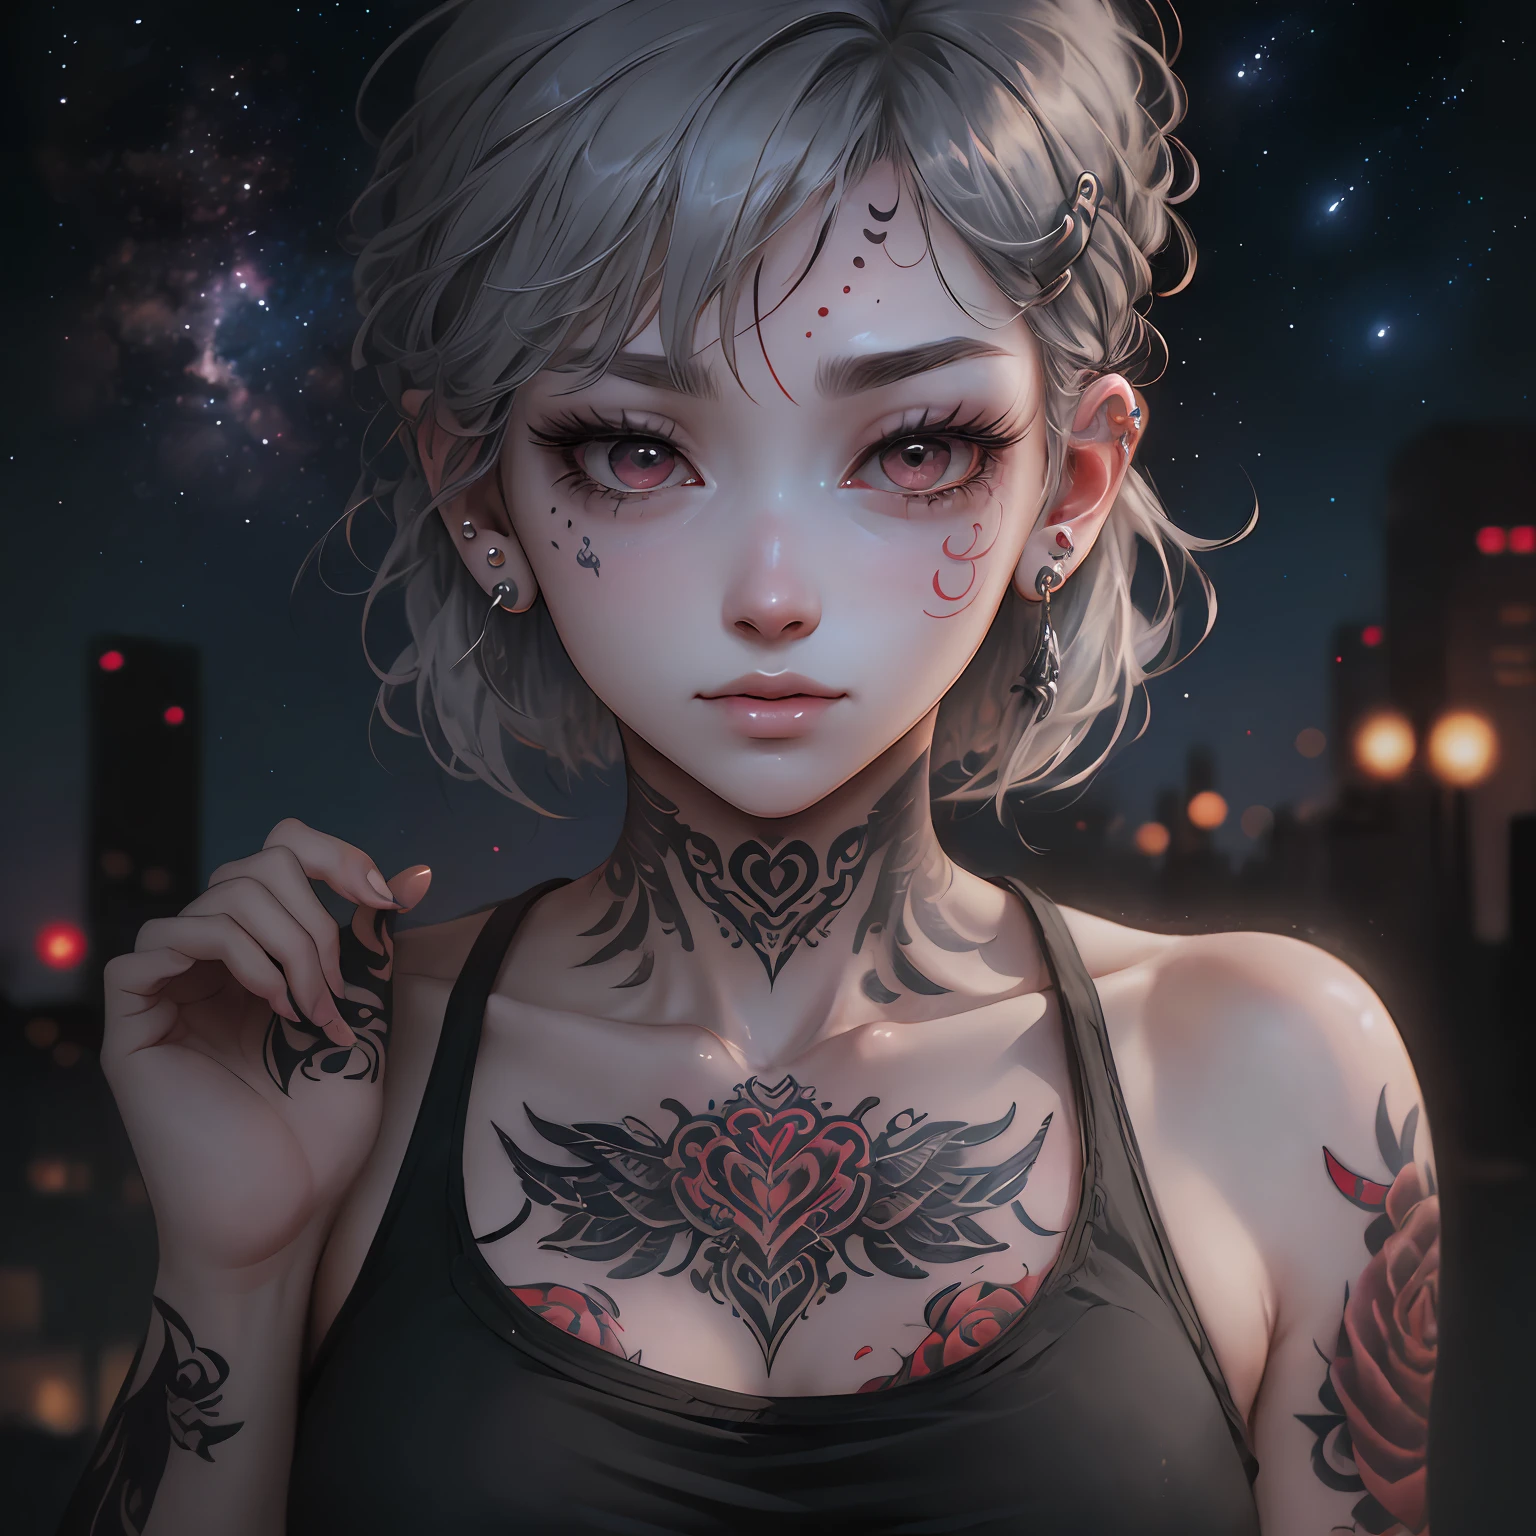 nightcity, Neon, Perfect starry sky, bsh, High Details, High Details, Super detail, Ultra-fine detailed paintings, (a one woman),８k,(slouch:1.4)、A lot of piercings in the ears、A lot of piercings on the face、body piercing、Tattoos on the face、、Tattoos around the eyes、Gray Hair, (slouch:1.3)、tank top,,,, Chest opened、big Eyes, (long eyelash:1.3), (very long eyelashes), Ethnic tattoos, (Tattoos covering the whole body), (A lot of tattoos), tattoos on chest, Tattoo on the arm, finger tattoo、(Tattoos all over the chest)、Beautiful features、Neutral facial features、(ple short hair)、beksinski、Artem Demla、